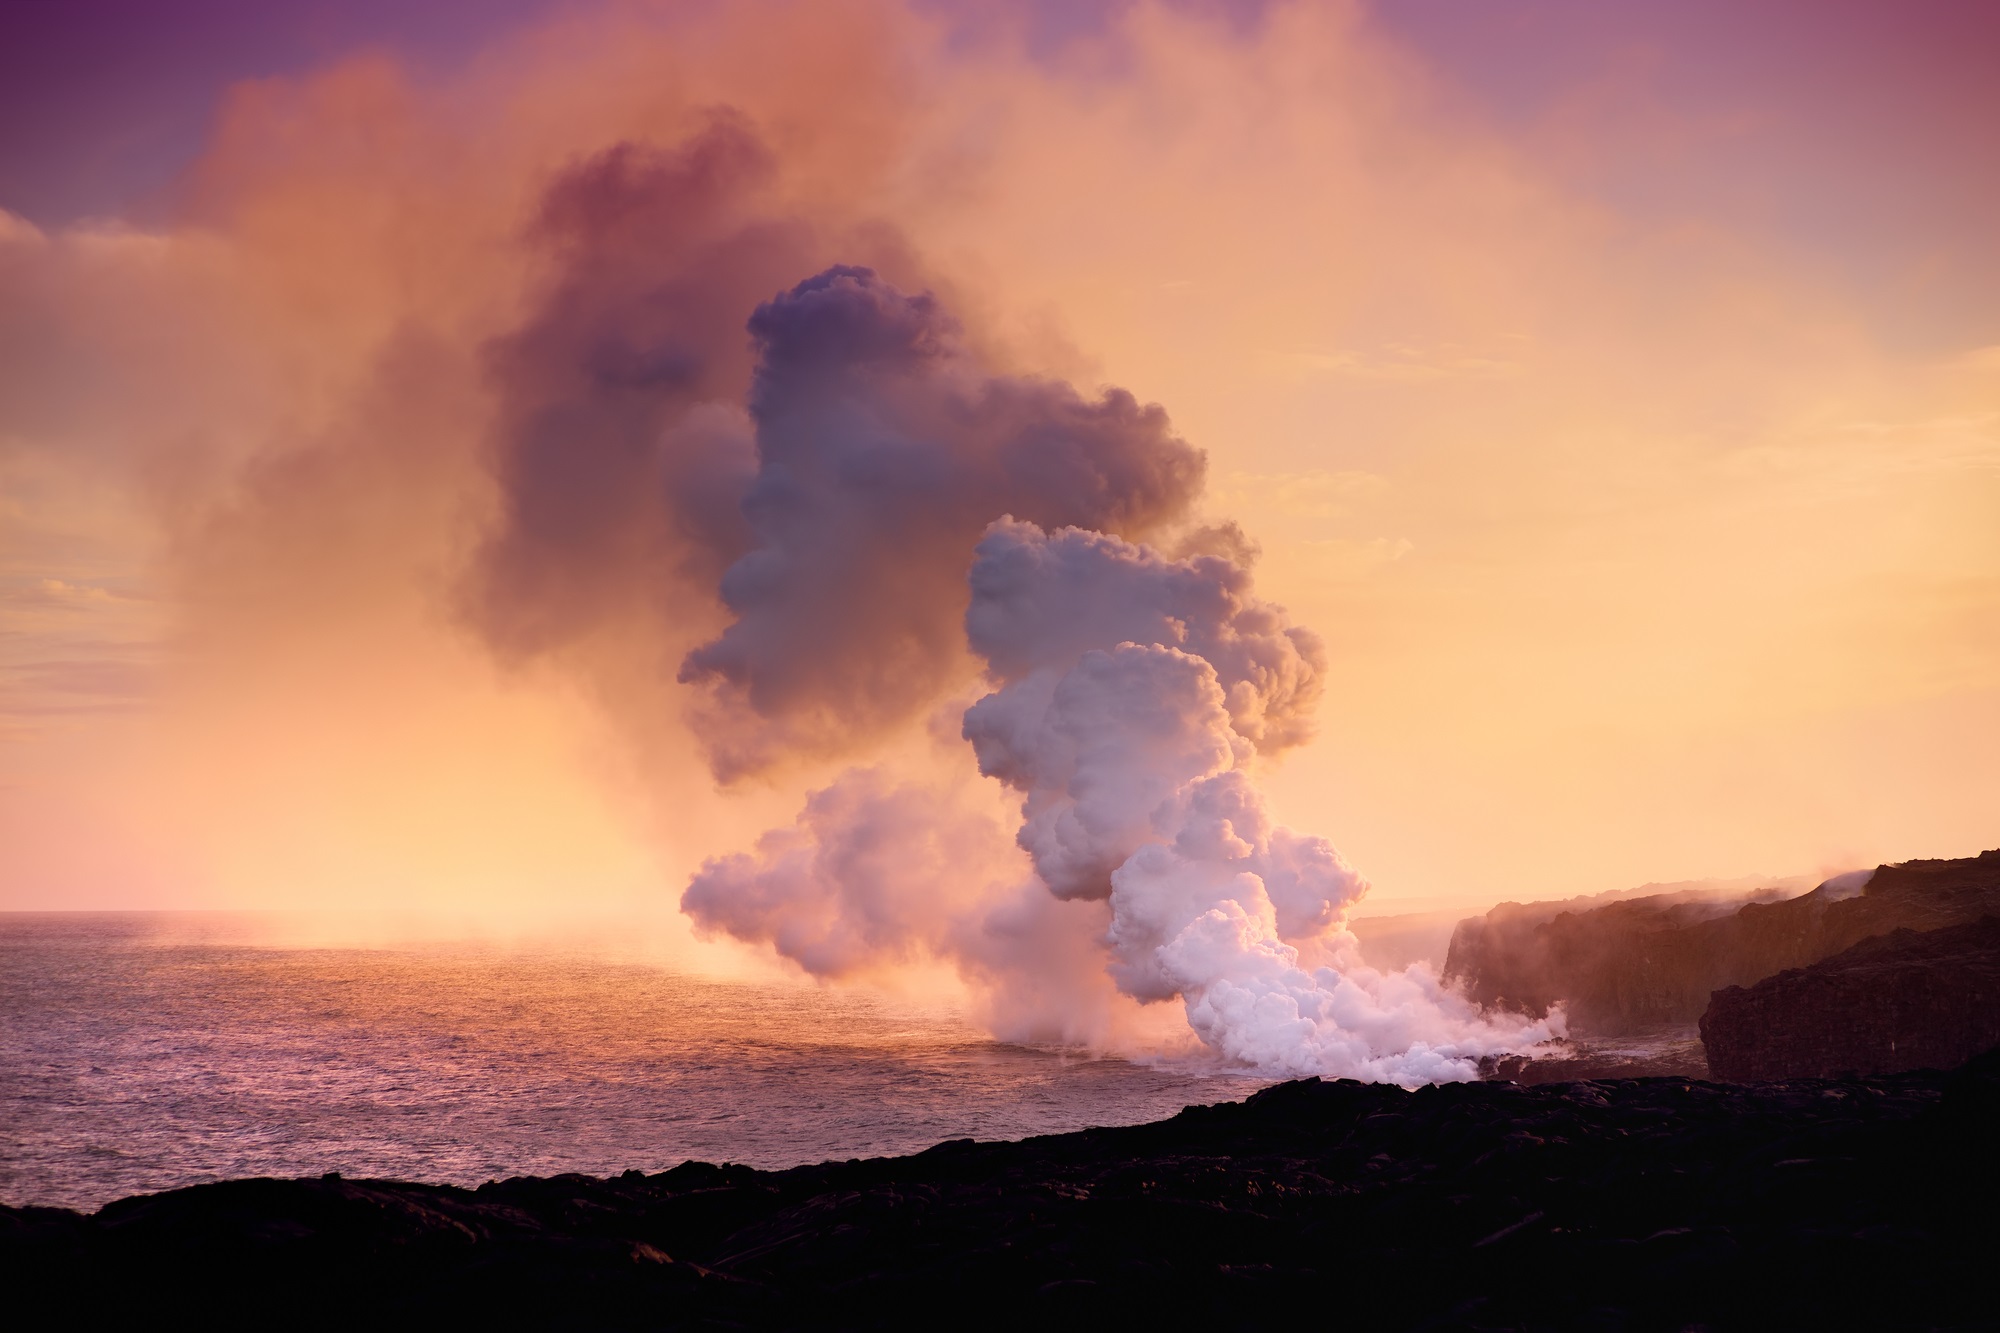 Volcano belching lava and gas above ocean to represent Great Oxygenation Event